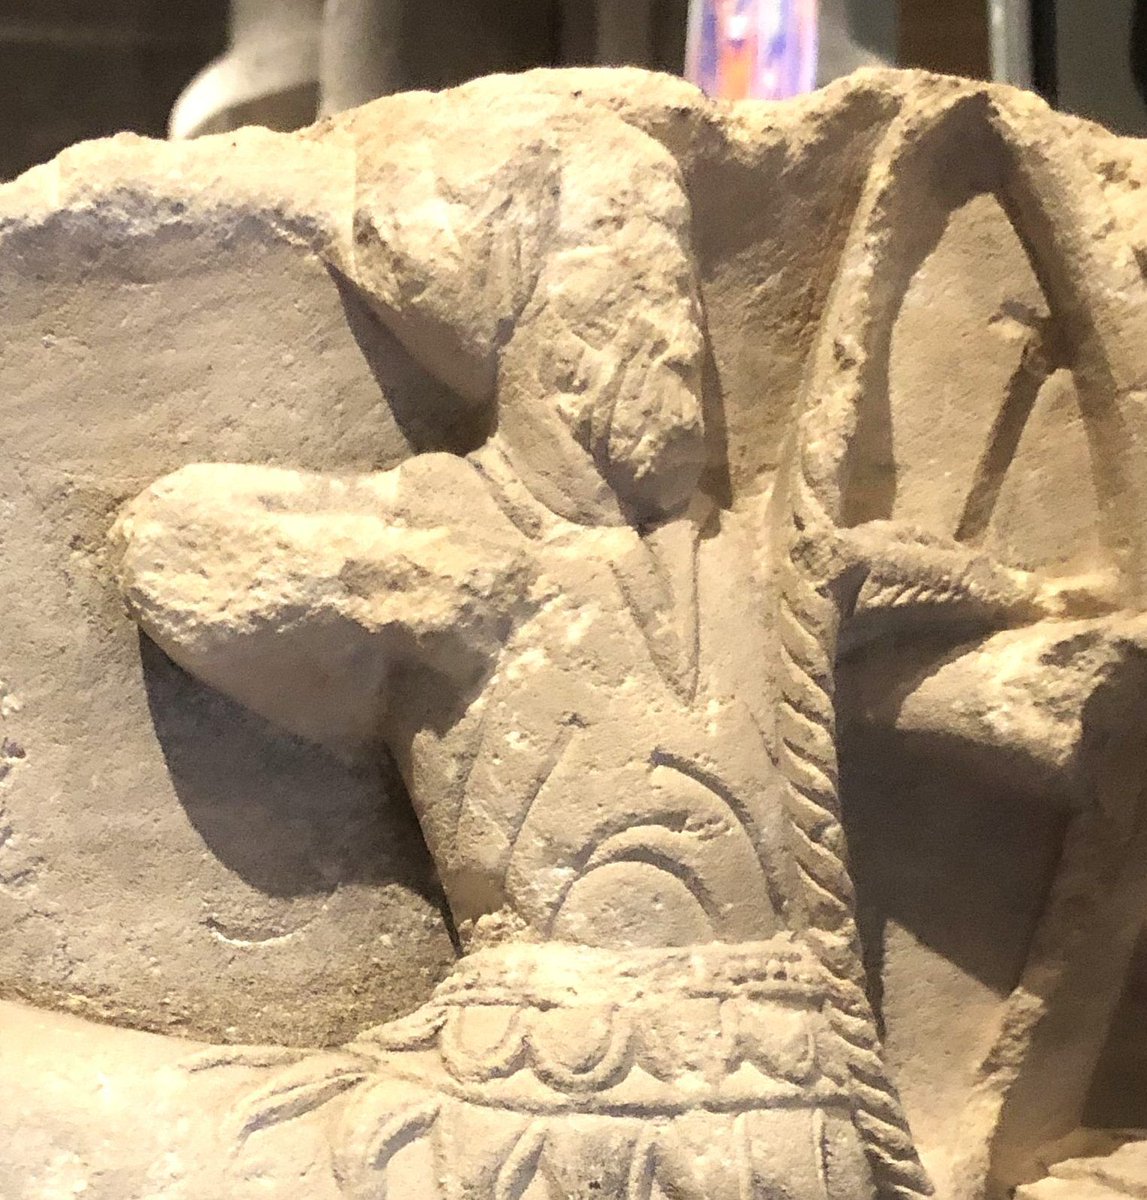 New Curious about collections blog-'Capitals & Mythical Creatures' Read about the cathedral's collection which includes examples of Romanesque capitals: bit.ly/3UhOhOF Don't forget to visit the ground floor of the Kings & Scribes exhibition where a capital is on display